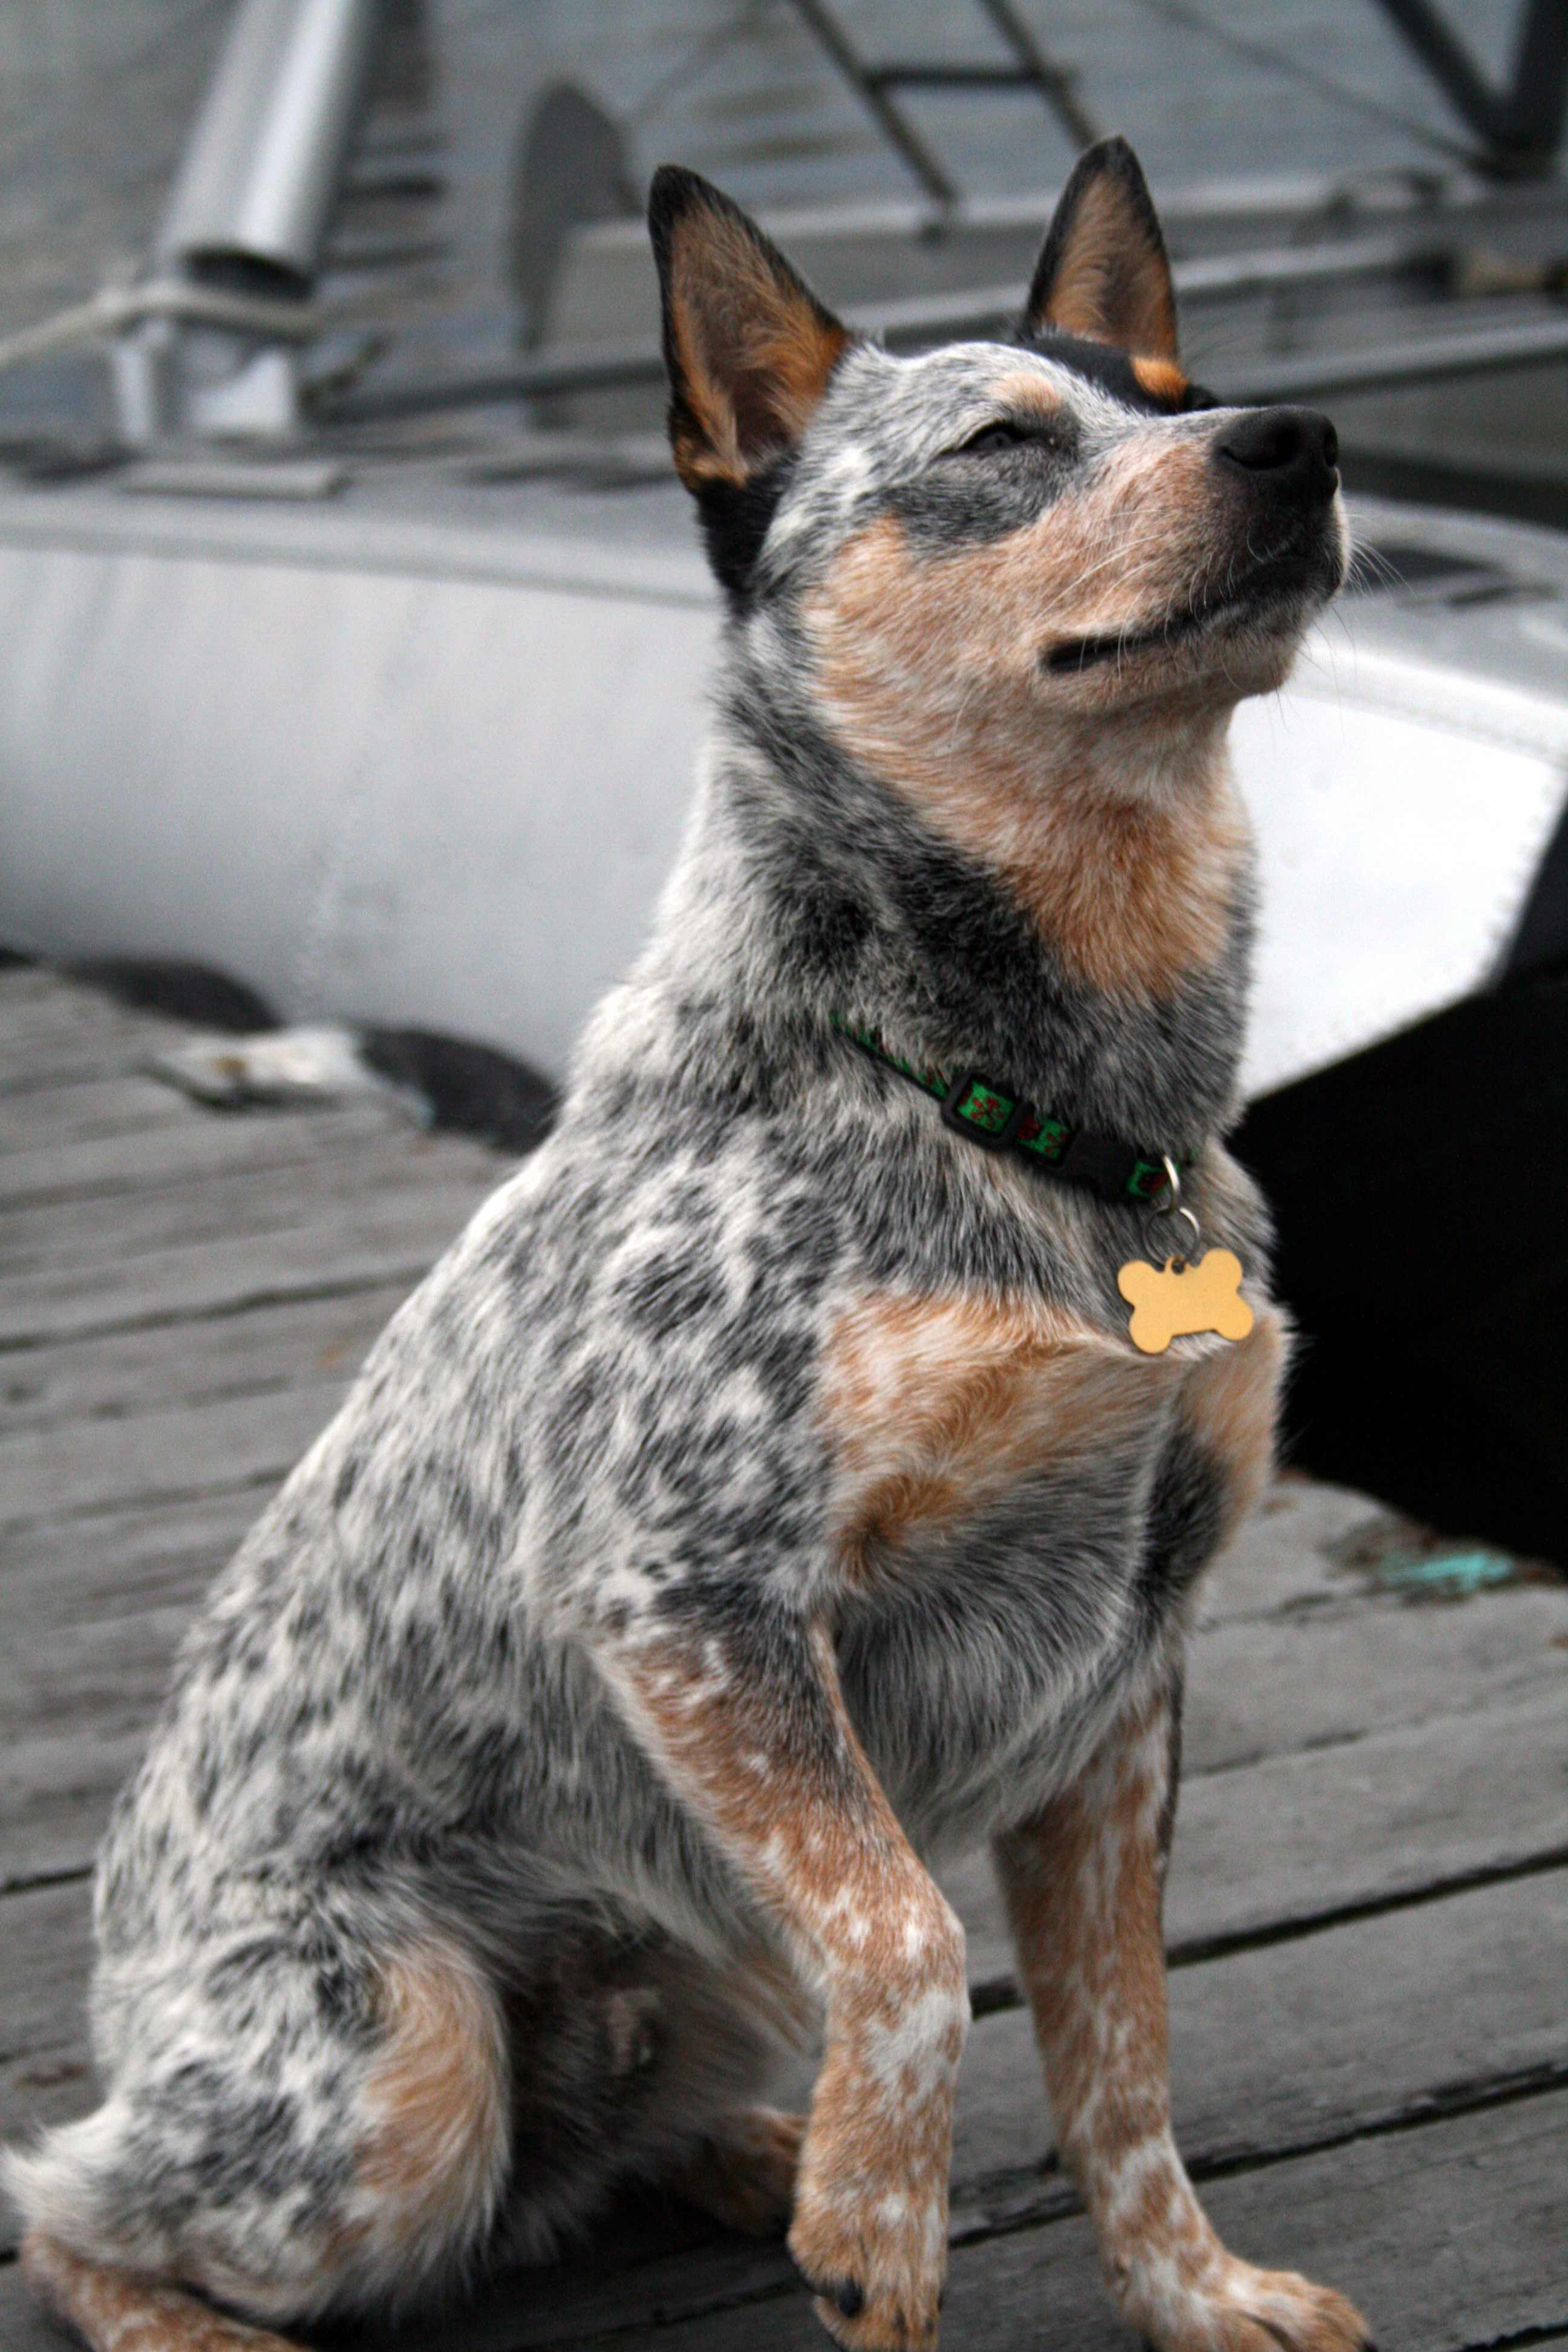 Australian Cattle Dog Breed Picture, Photo, & Image